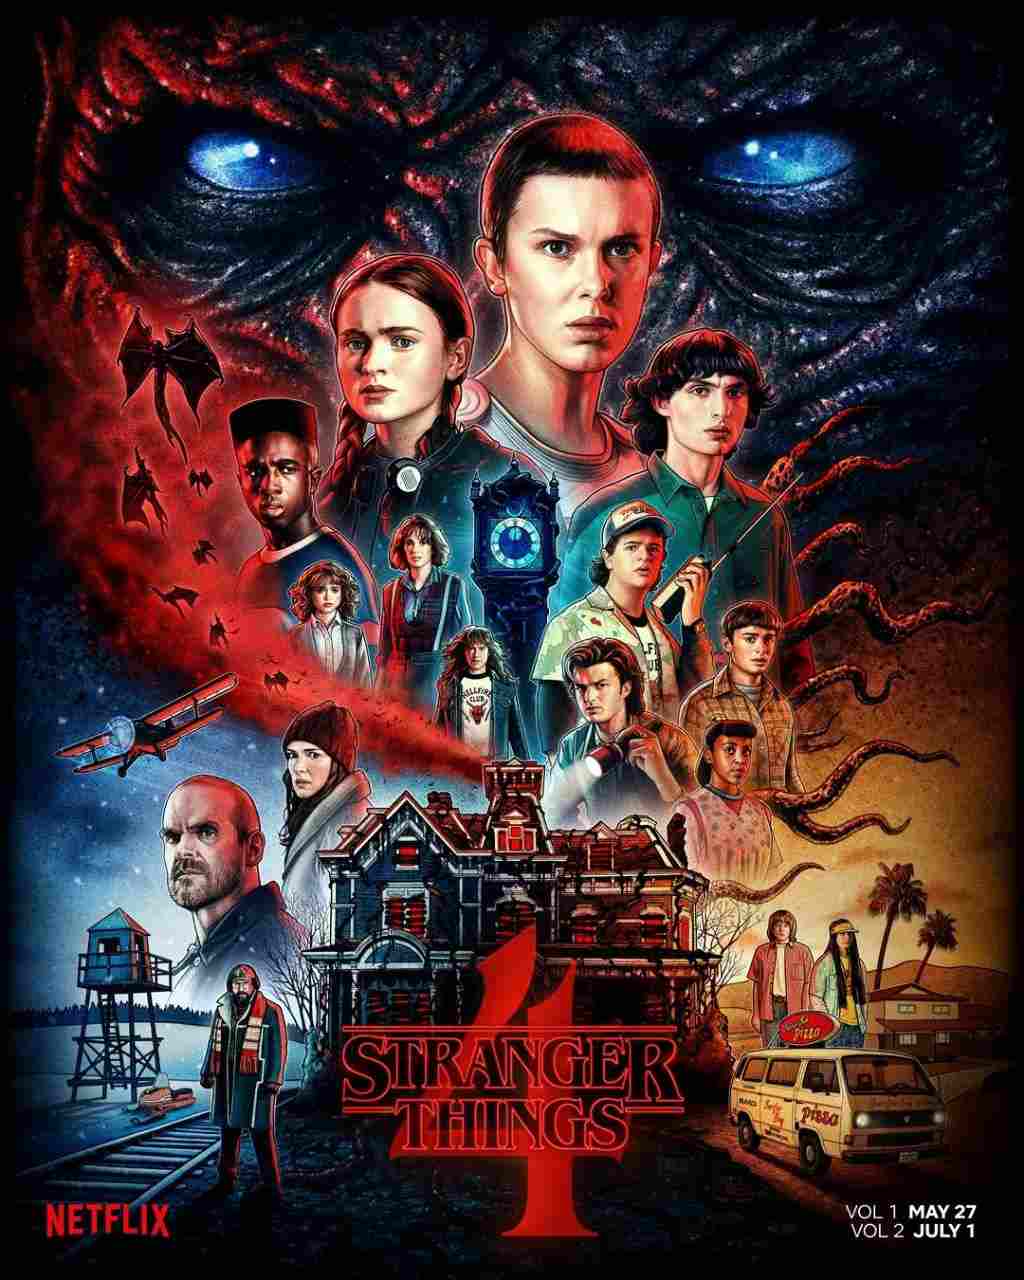 Stranger-Things-S4-2022-Hindi-Dubbed-Completed-Web-Series-HEVC-ESub-Episode-08-09-Added